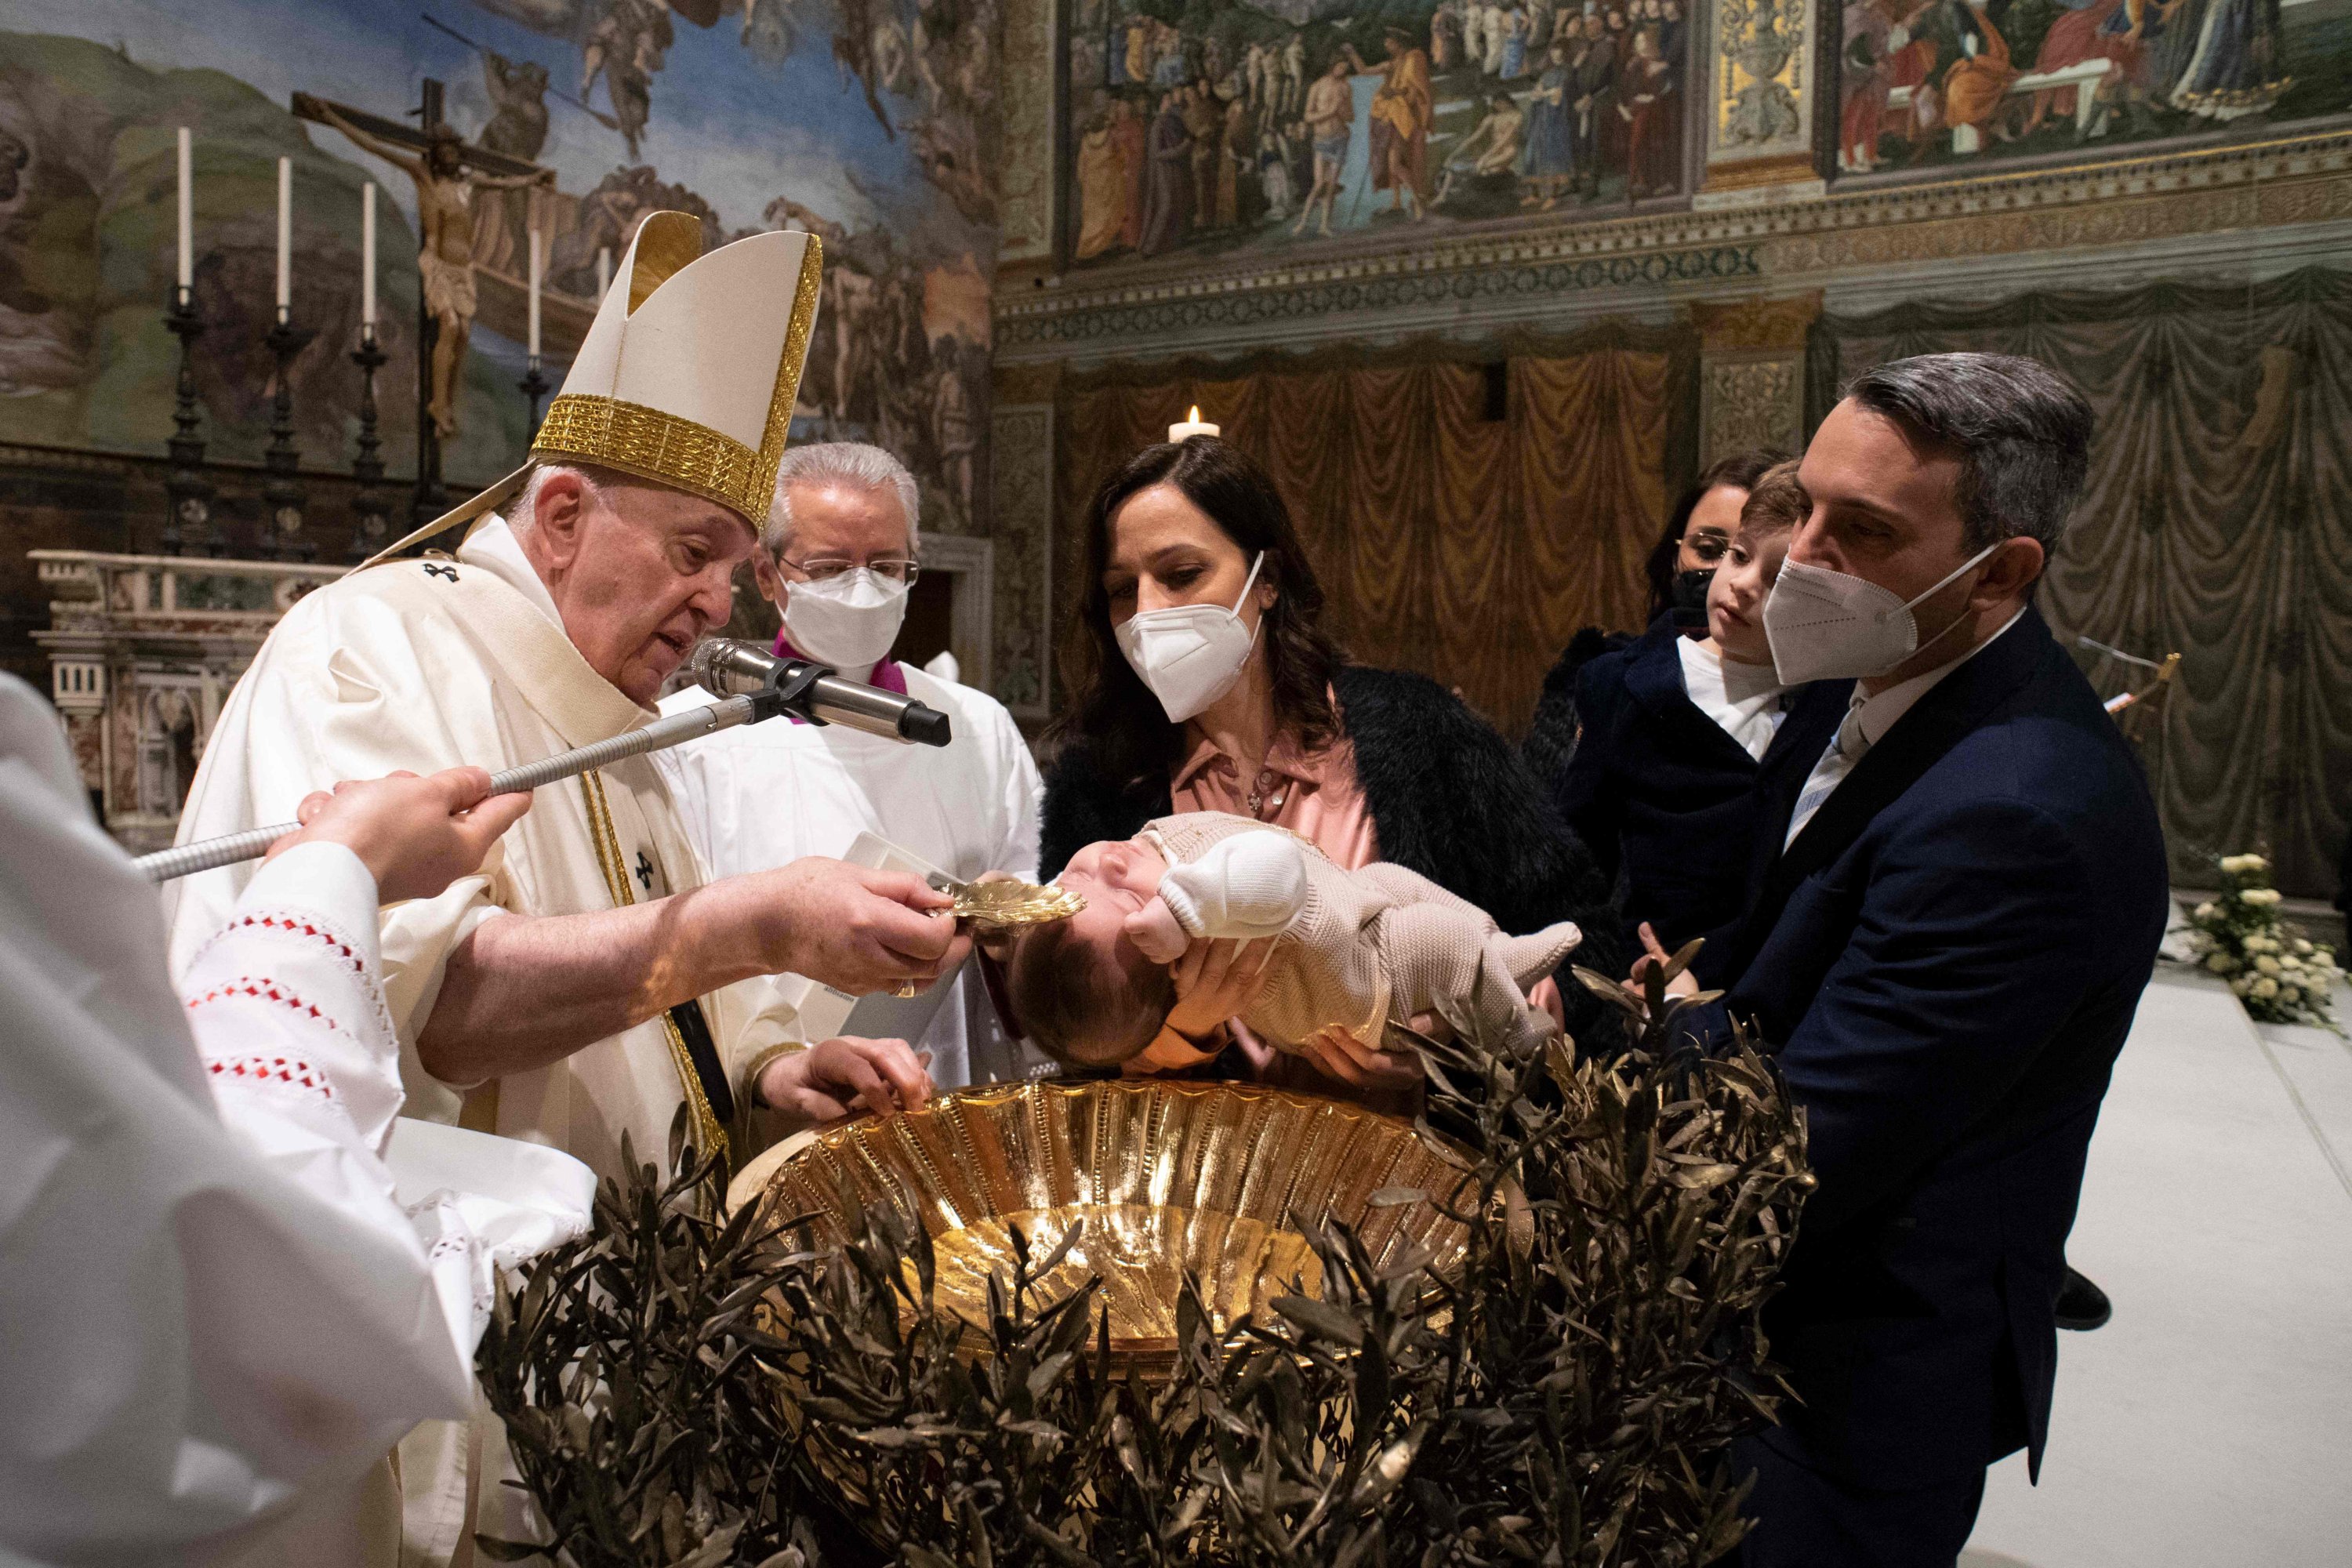 A handout picture taken and released on January 9, 2022 by the Divisione Produzione Fotografica shows Pope Francis baptising a child during the Holy Mass in the Sistine Chapel in Vatican. (Photo by Simone Risoluti/Divisione Produzione Fotografica via AFP)